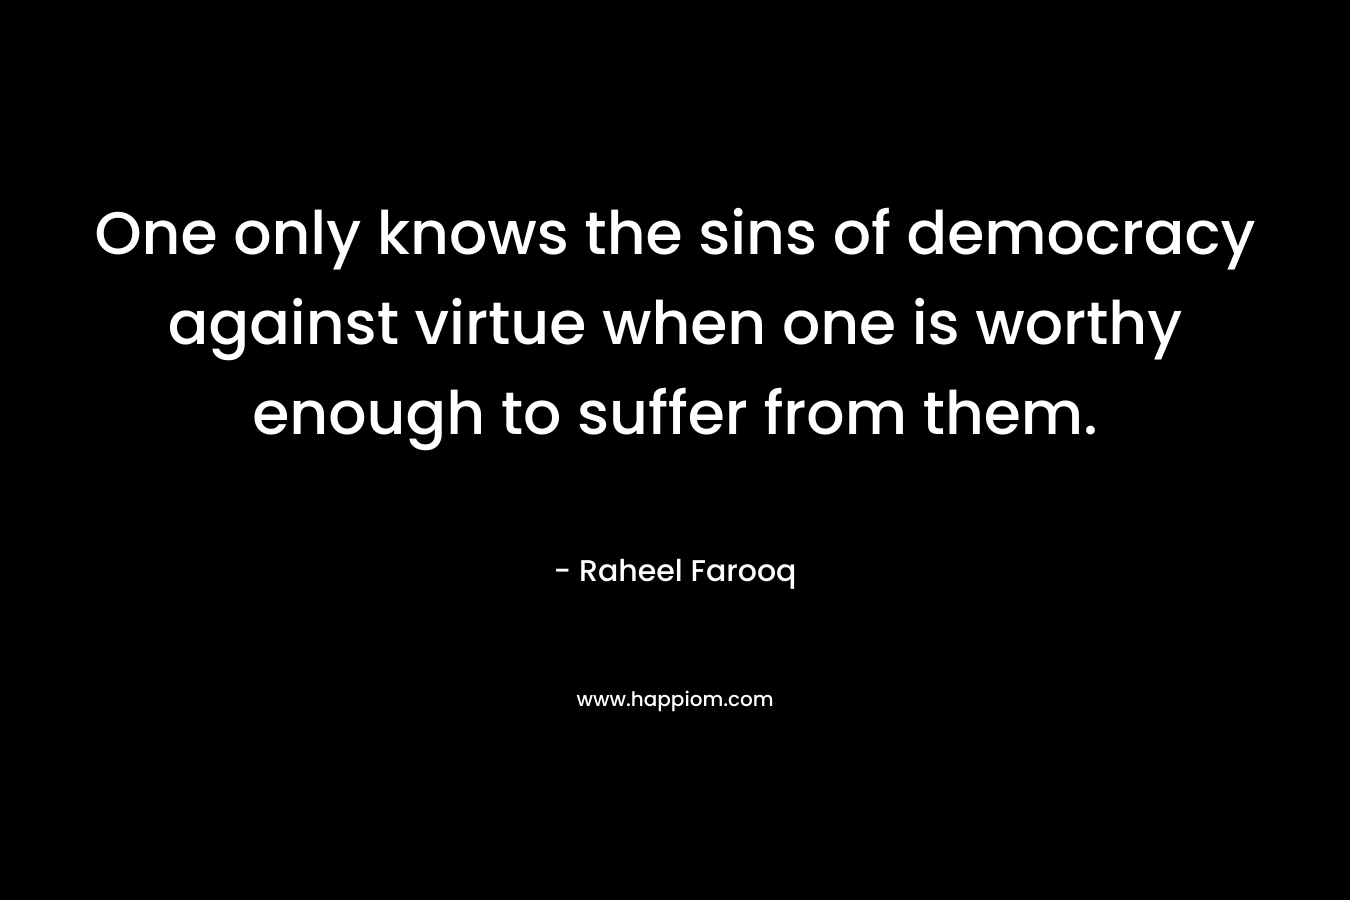 One only knows the sins of democracy against virtue when one is worthy enough to suffer from them. – Raheel Farooq